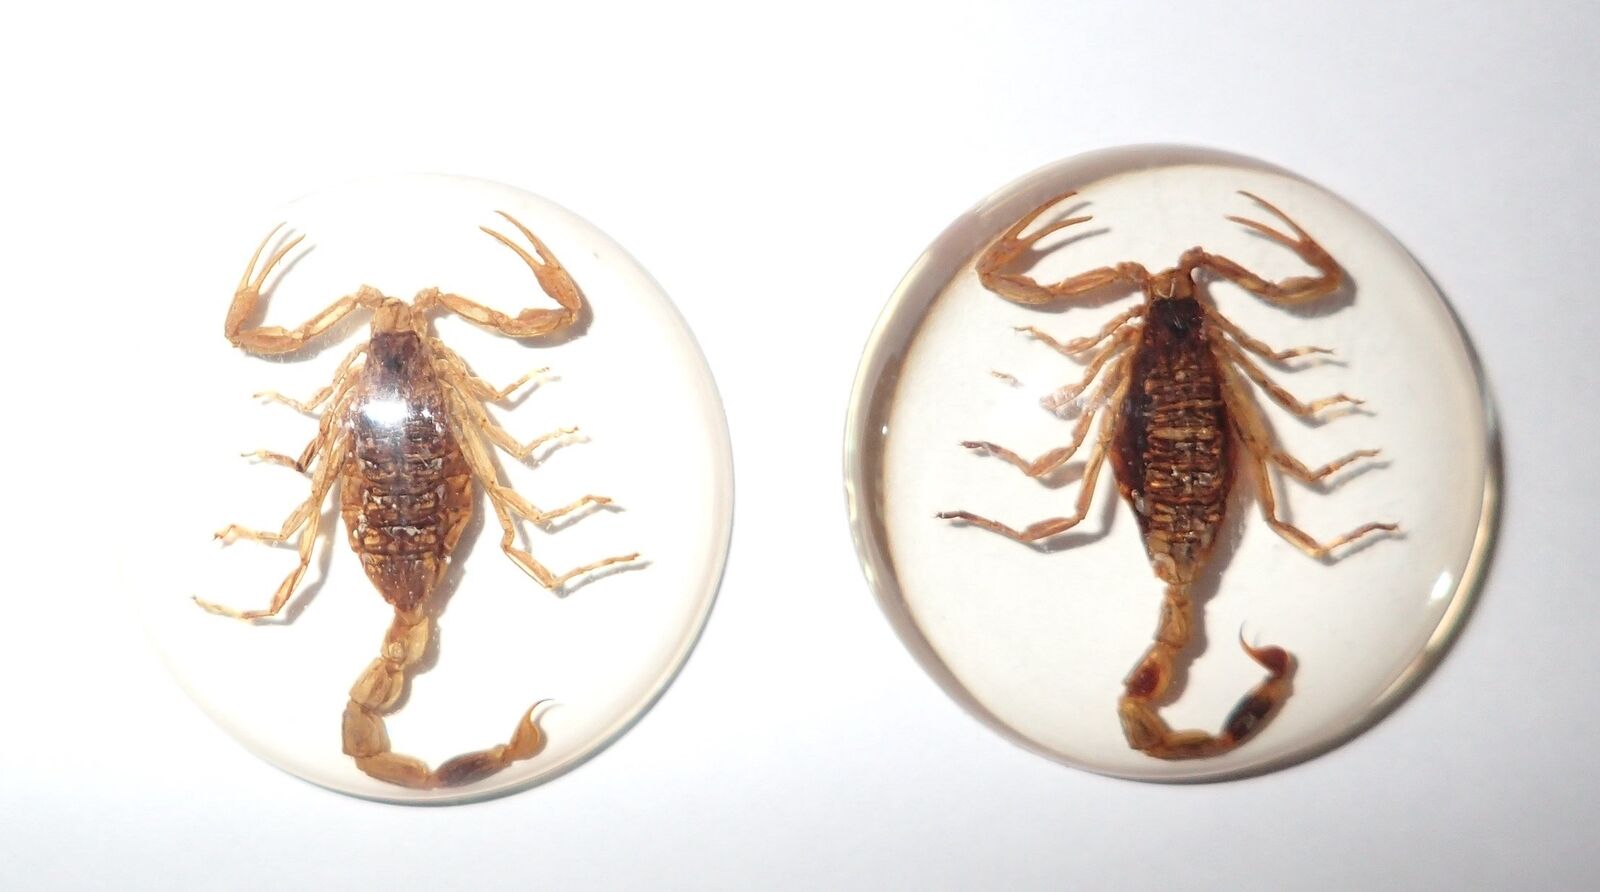 Insect Cabochon Golden Scorpion Specimen Round 35 mm Clear 2 pieces Lot